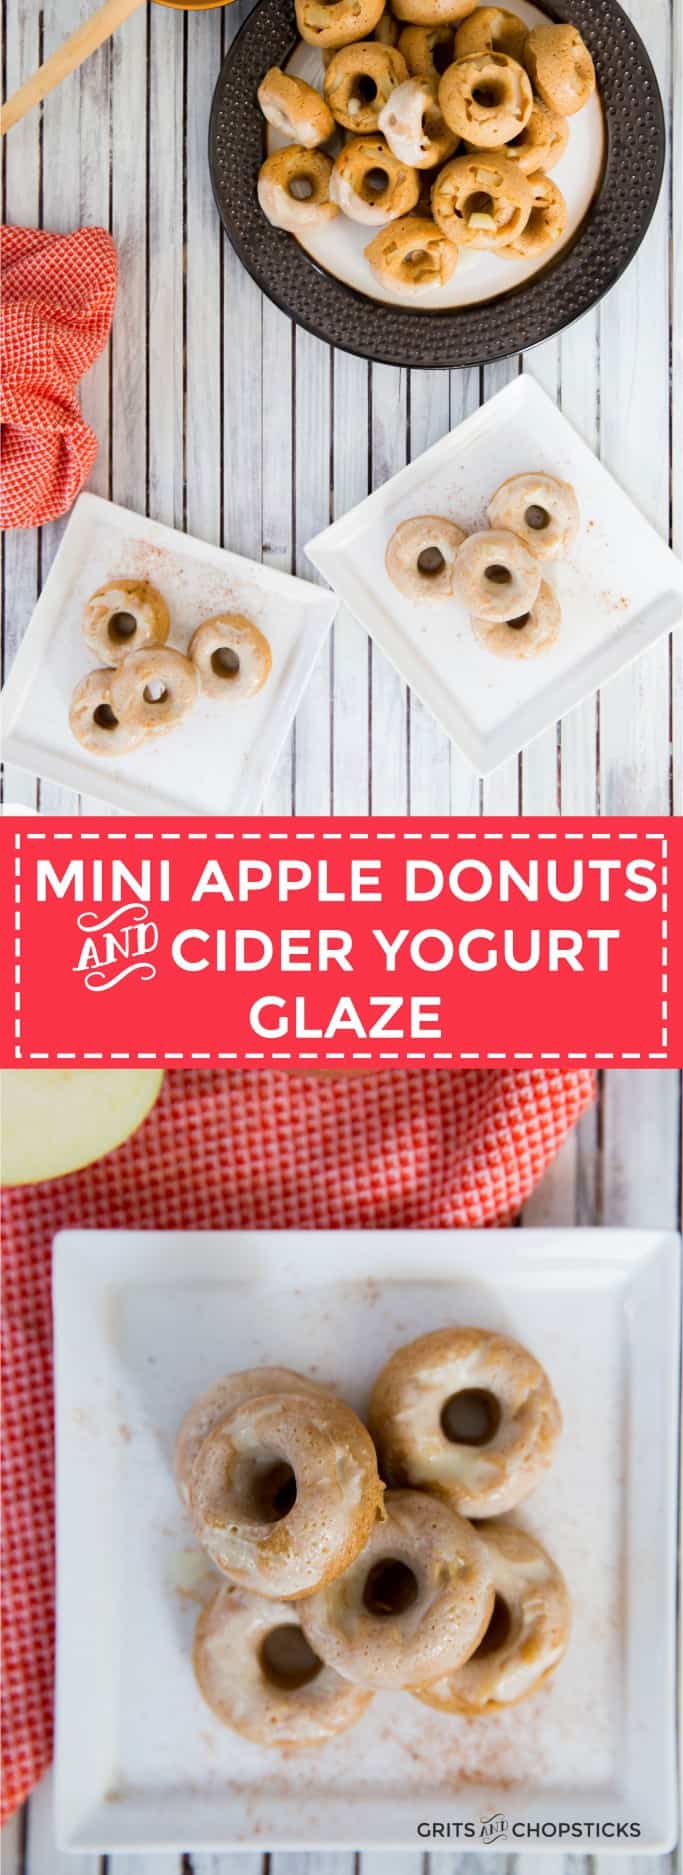 Baked mini apple donuts with apple cider yogurt glaze are a handy treat for your fall tailgates -- especially because they're made with Chobani Greek yogurt!